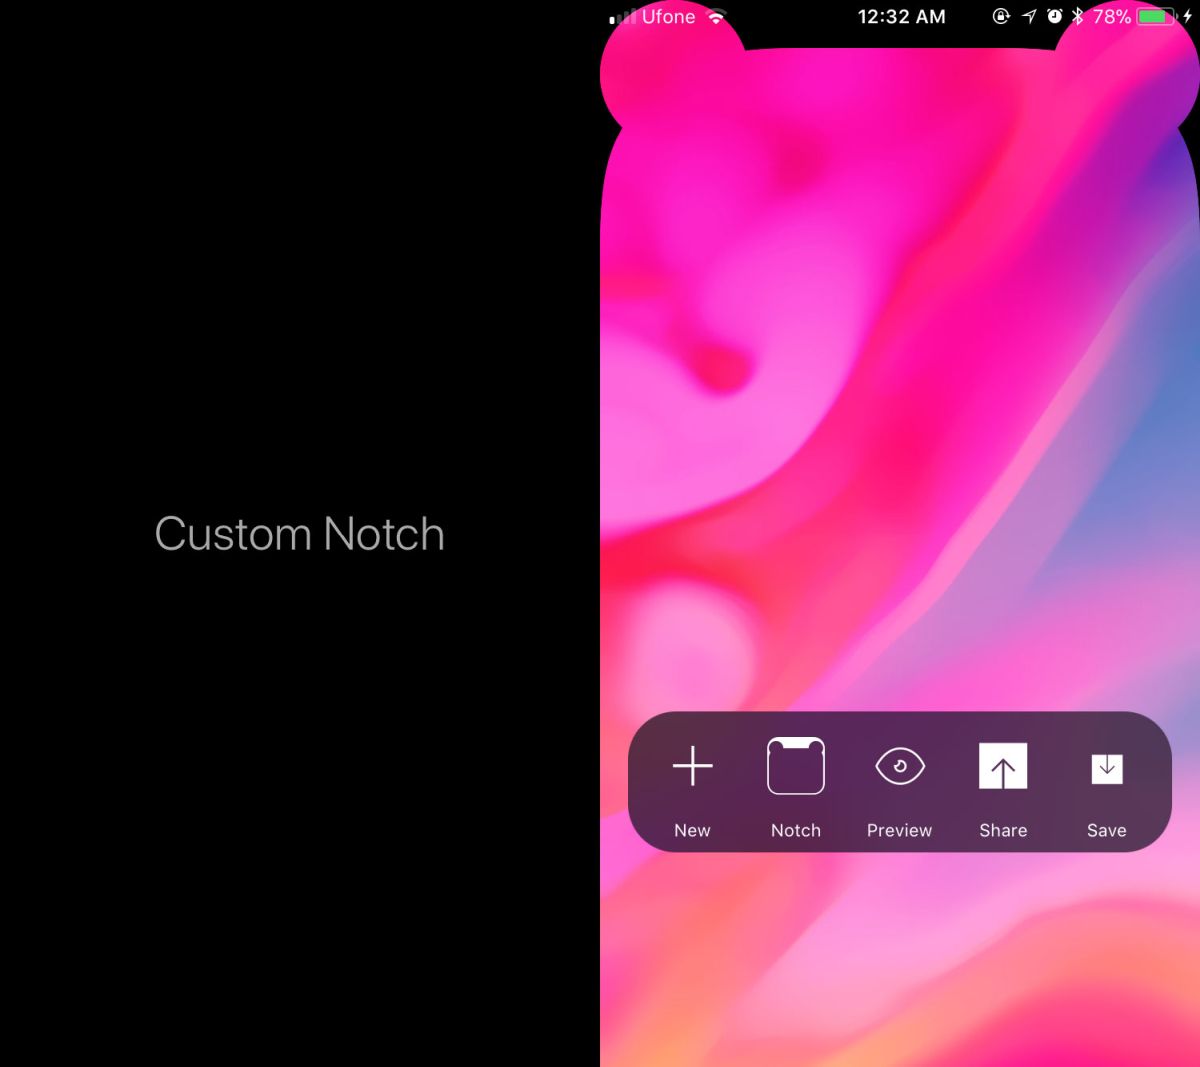 How To Customize The Notch On iPhone X — 